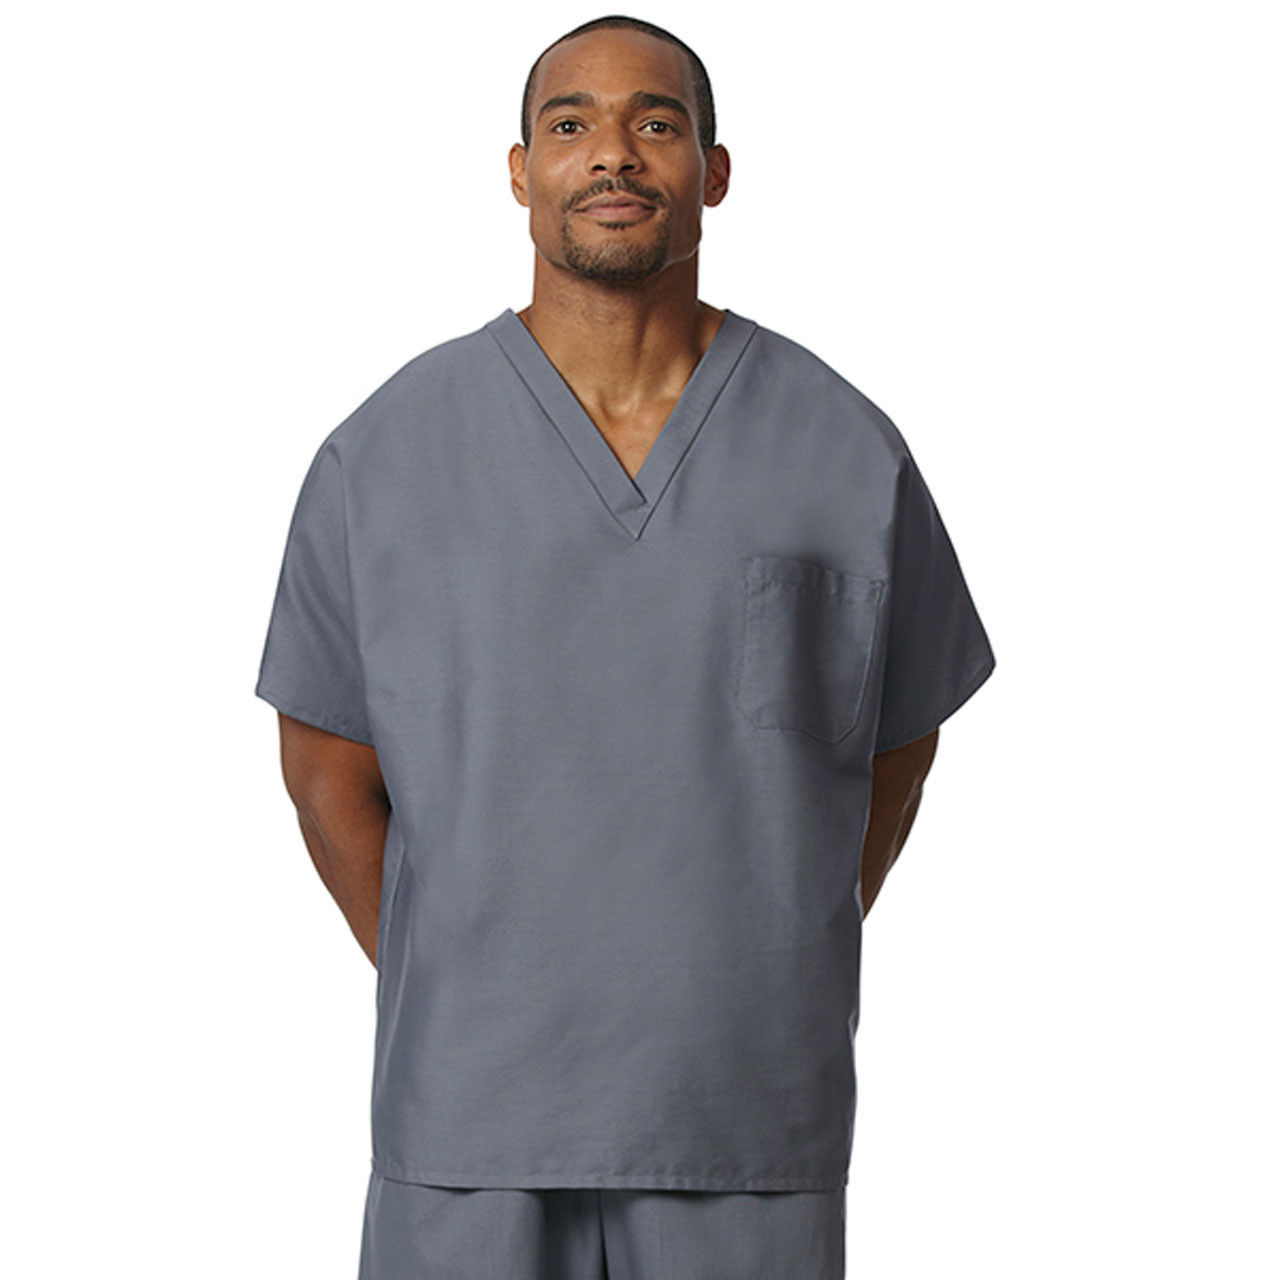 Are the Womens and Mens Tall Scrub Tops unisex?